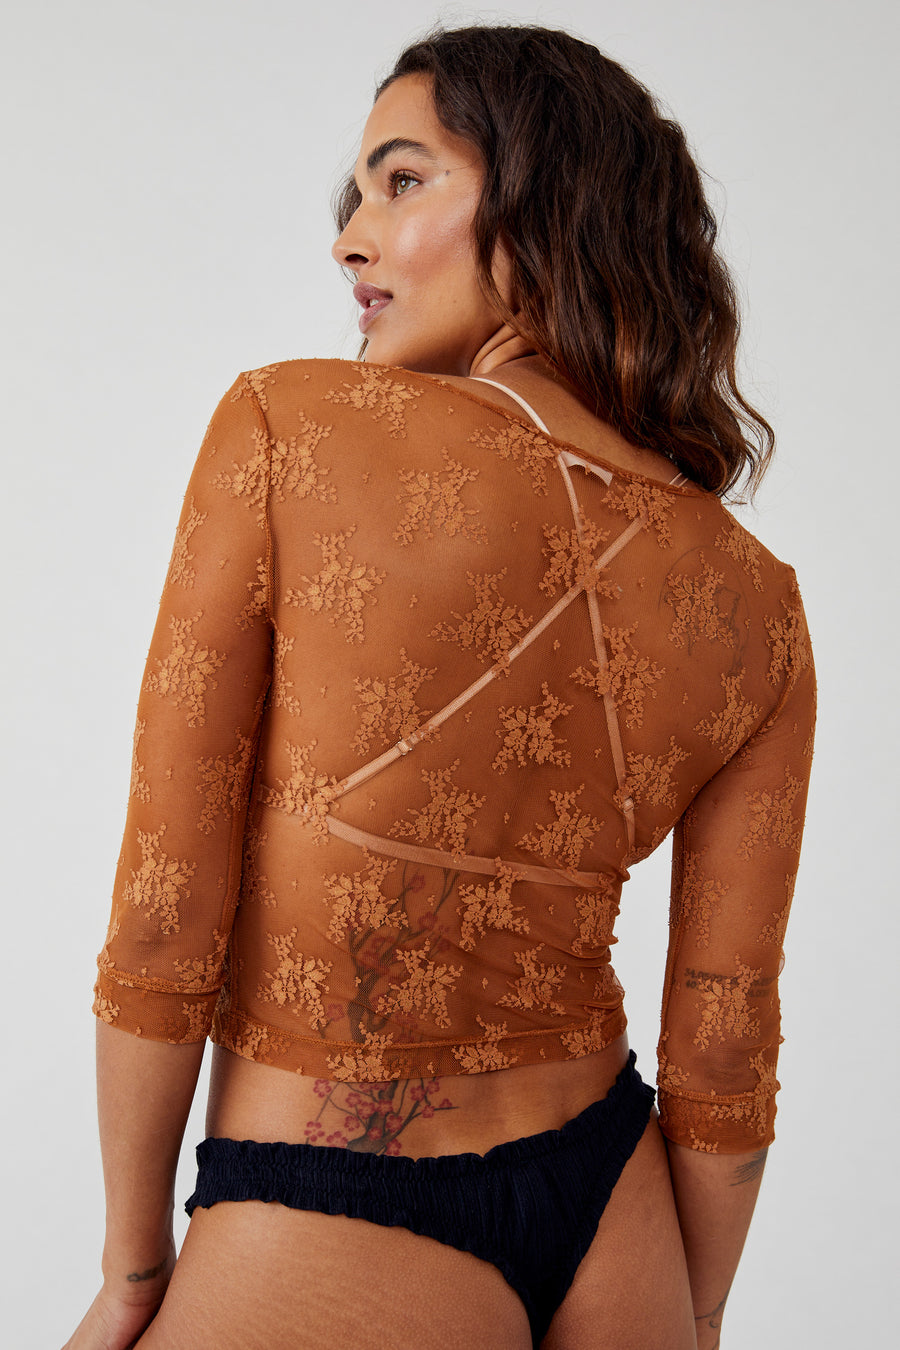 Free People Lost In Lace - Bright Cider